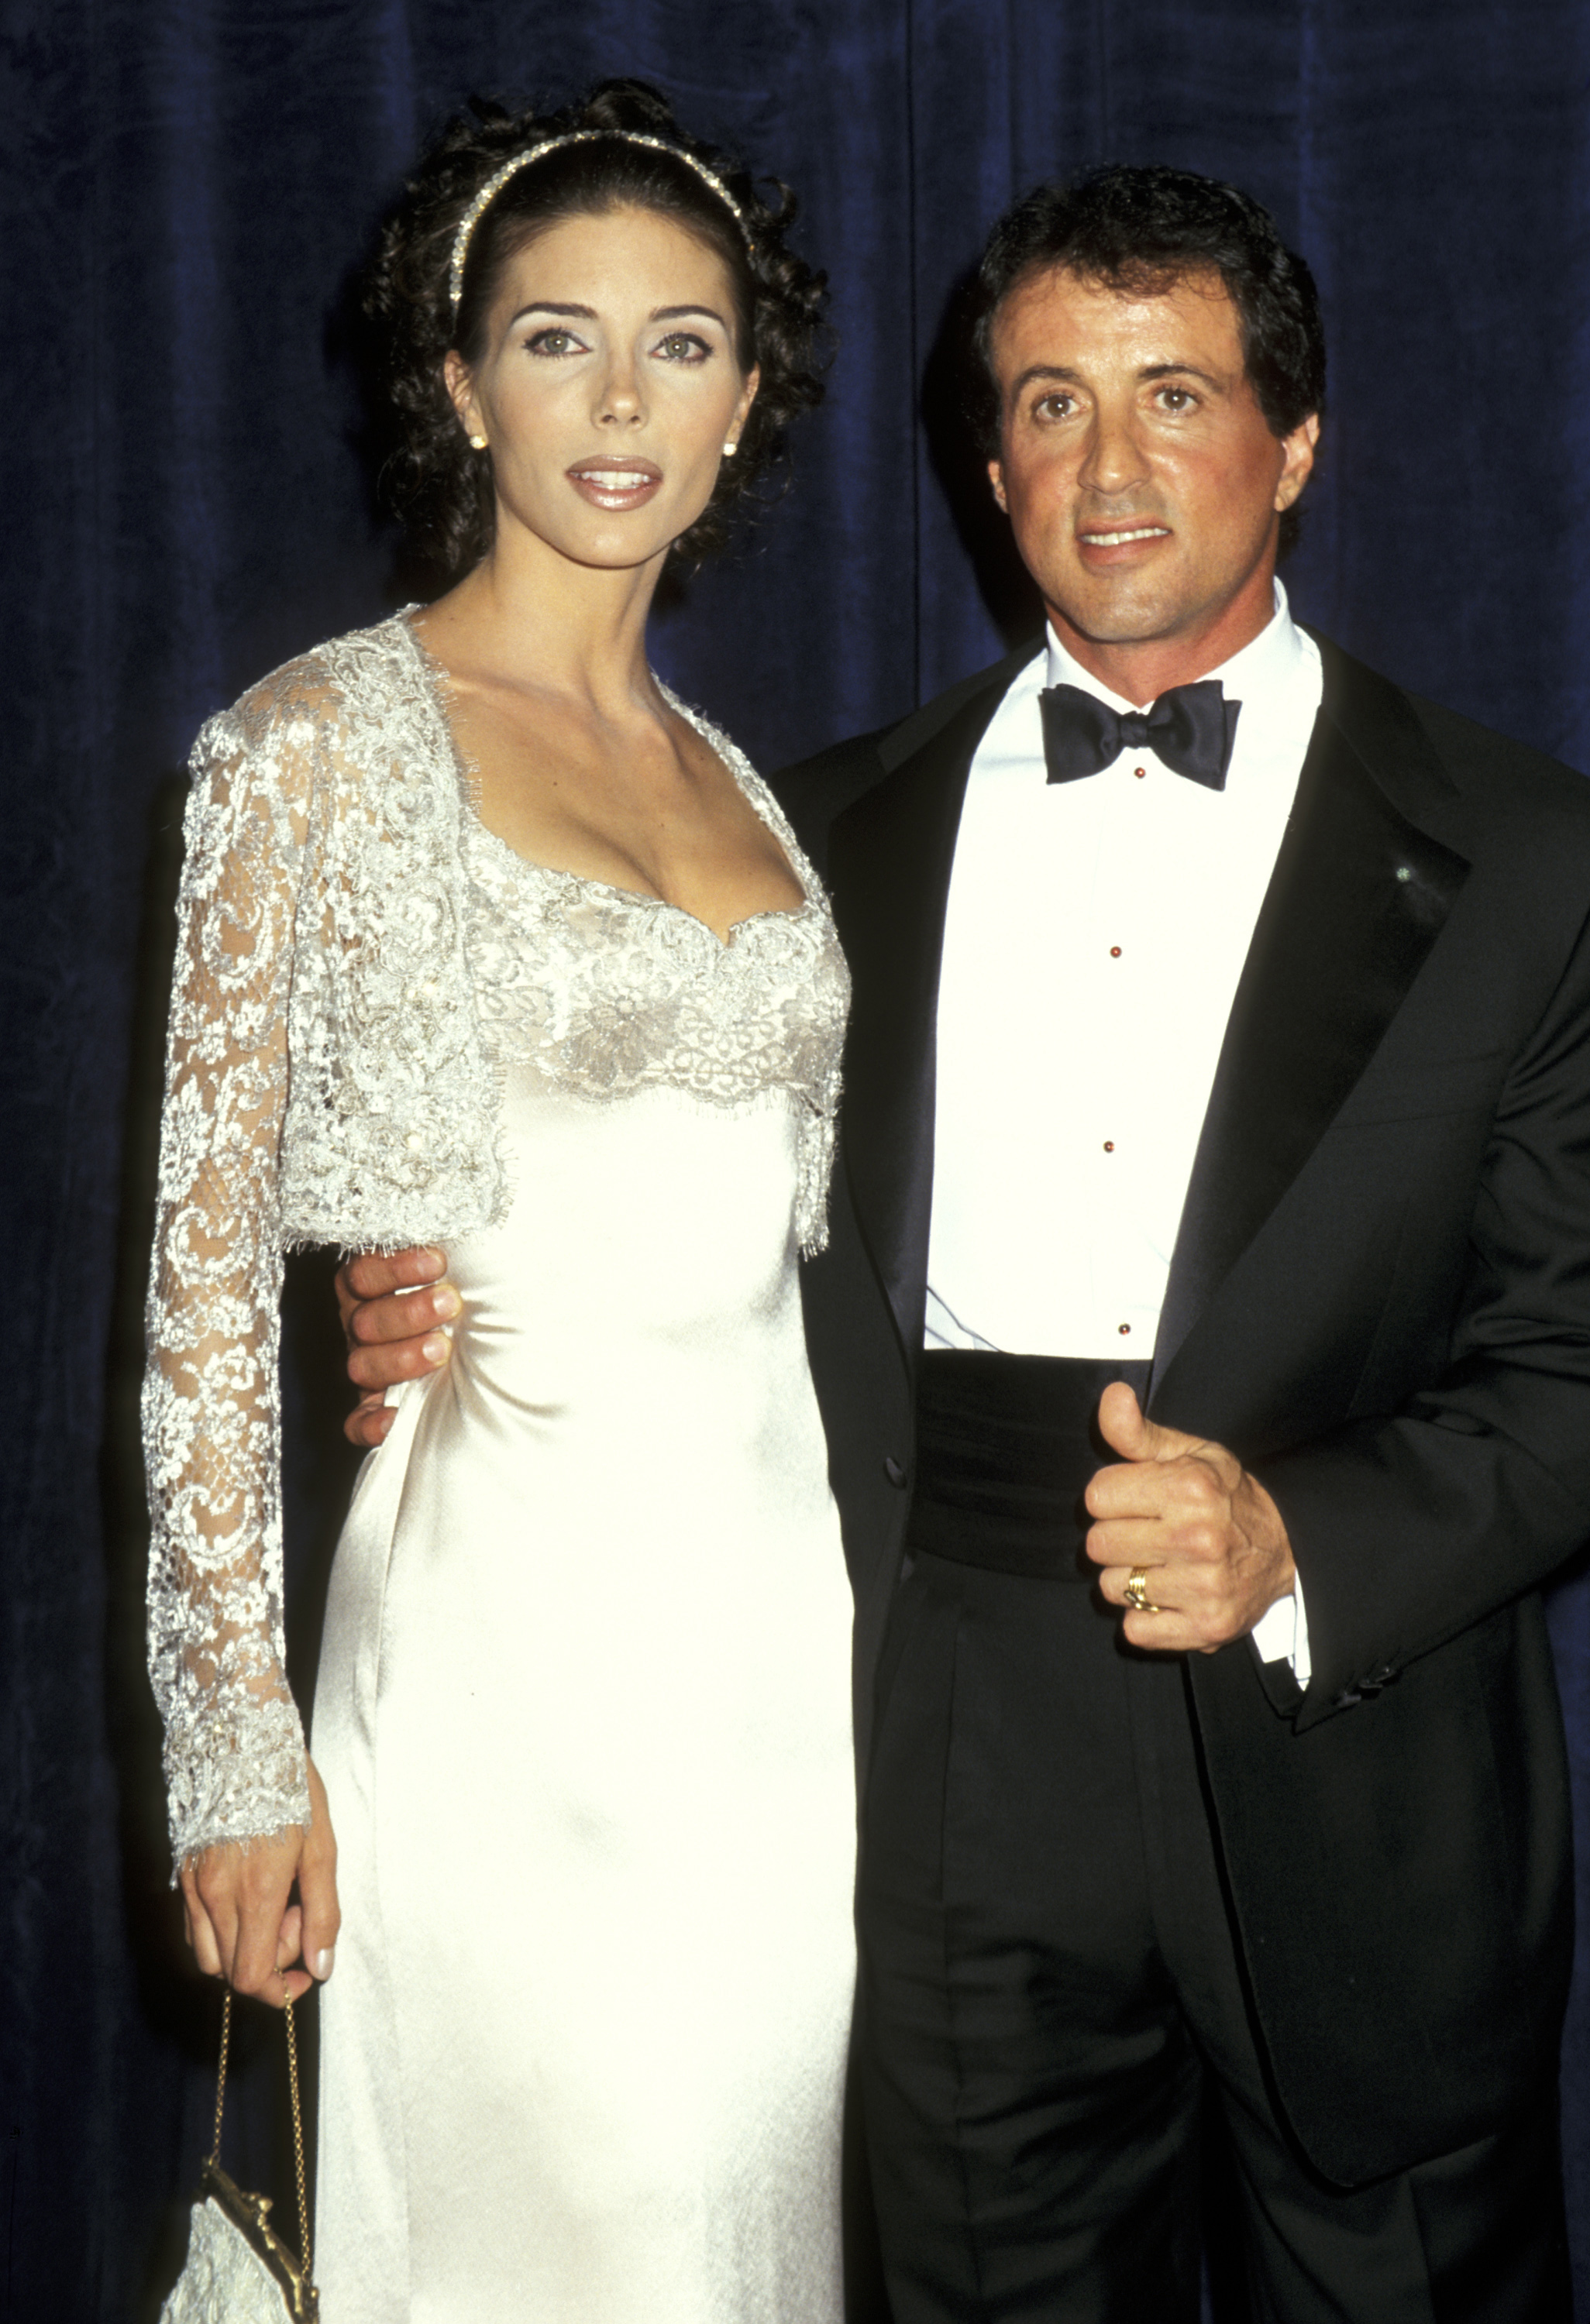 Jennifer Flavin and Sylvester Stallone at the Friars Club Honors John Travolta and Kelly Preston event in New York City, 1997 | Source: Getty Images